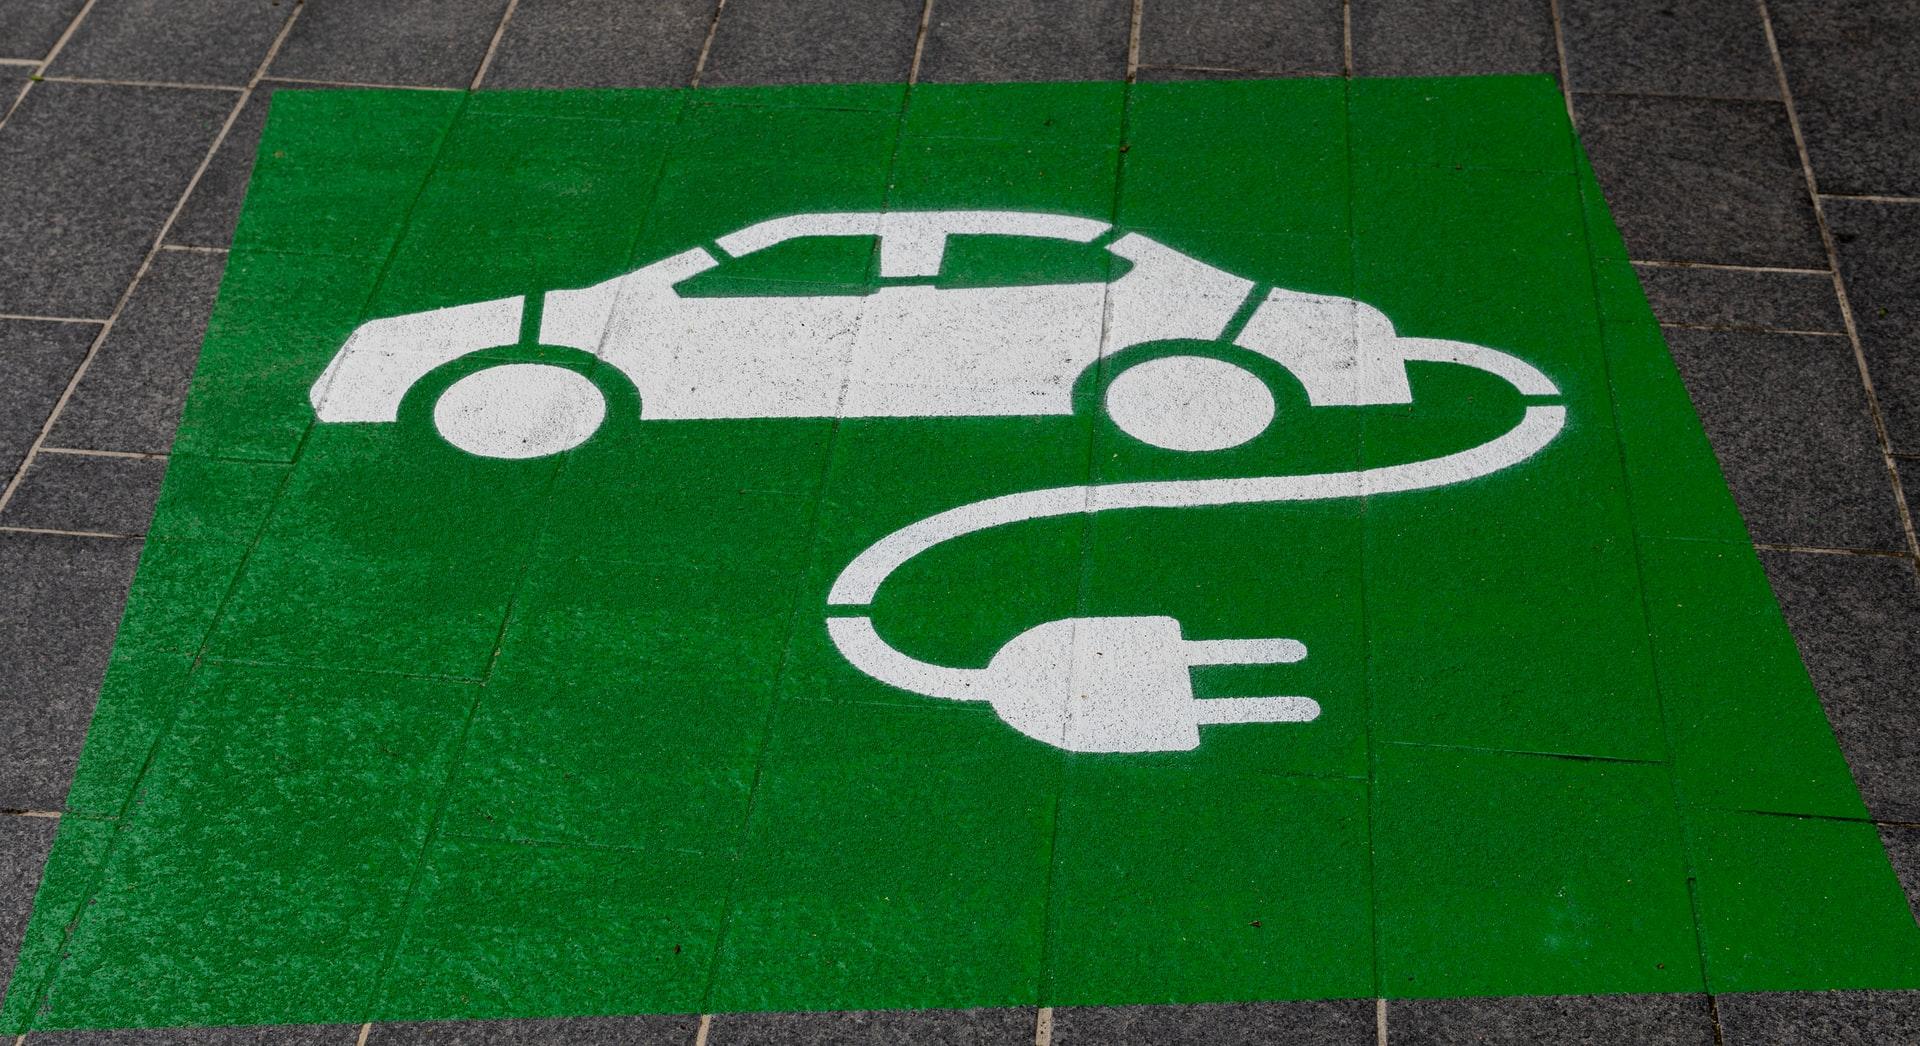 More electric cars means more electricity will be needed to fuel them.